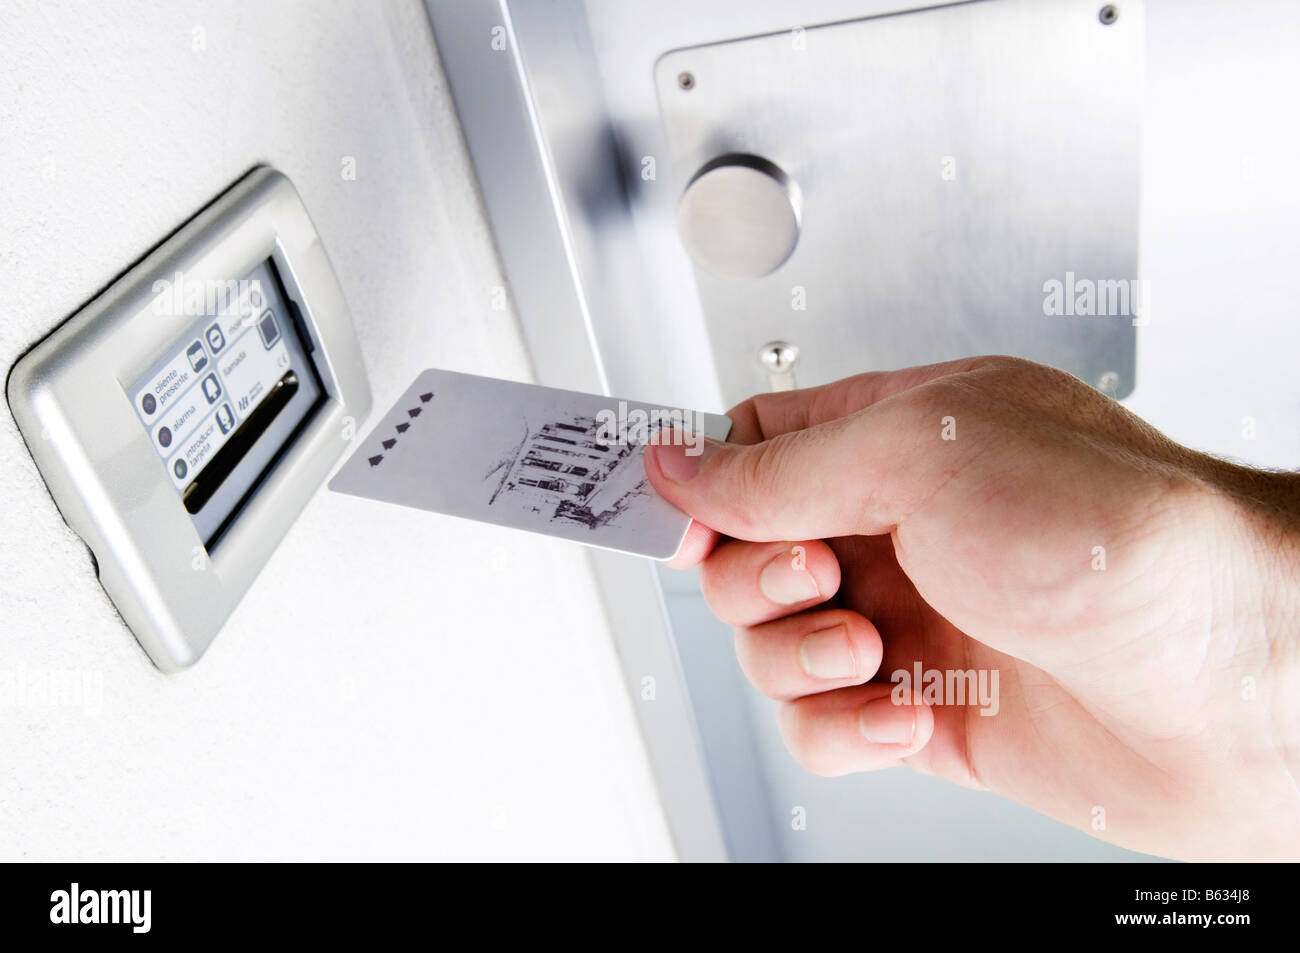 Close-up of a person's hand inserting cardkey Banque D'Images